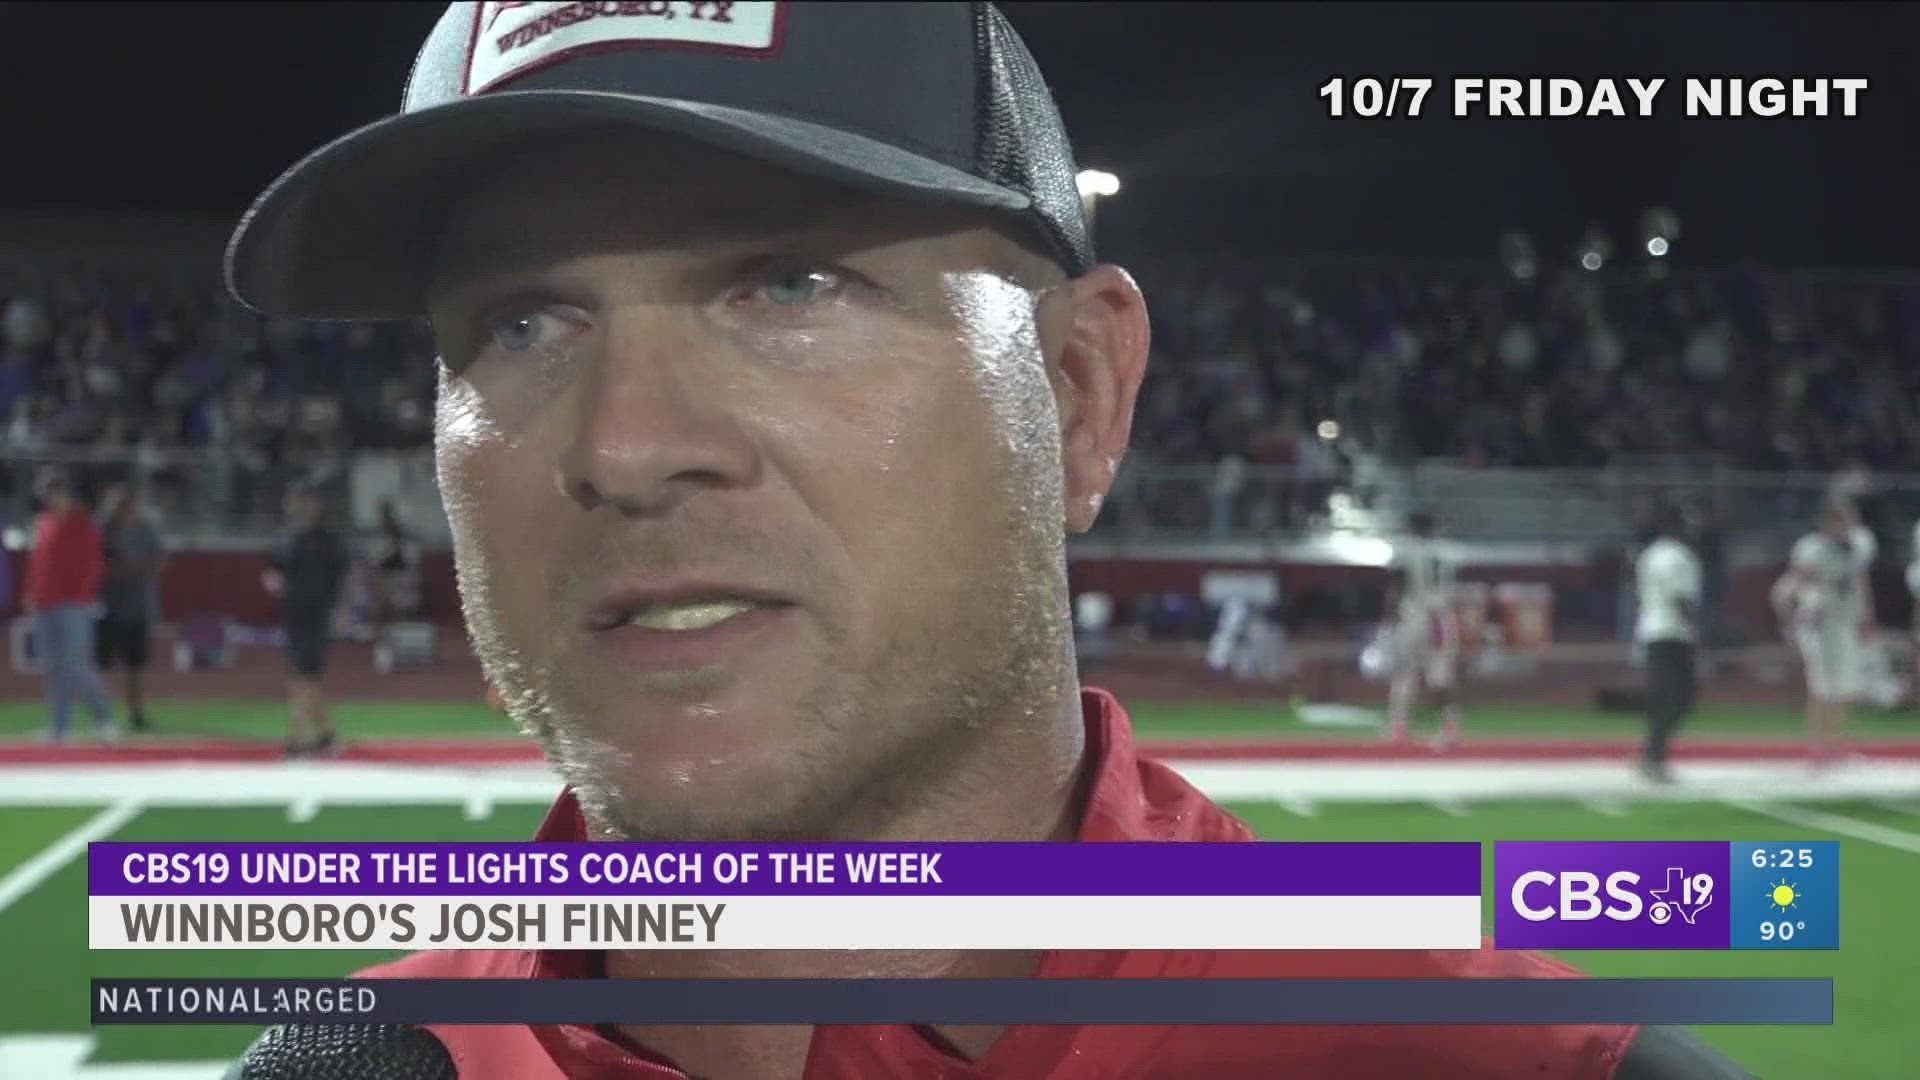 After a win over then No. 2 ranked Mount Vernon Tigers, the Winnsboro Raiders put teams on notice, earning Josh Finney, Coach of the Week.